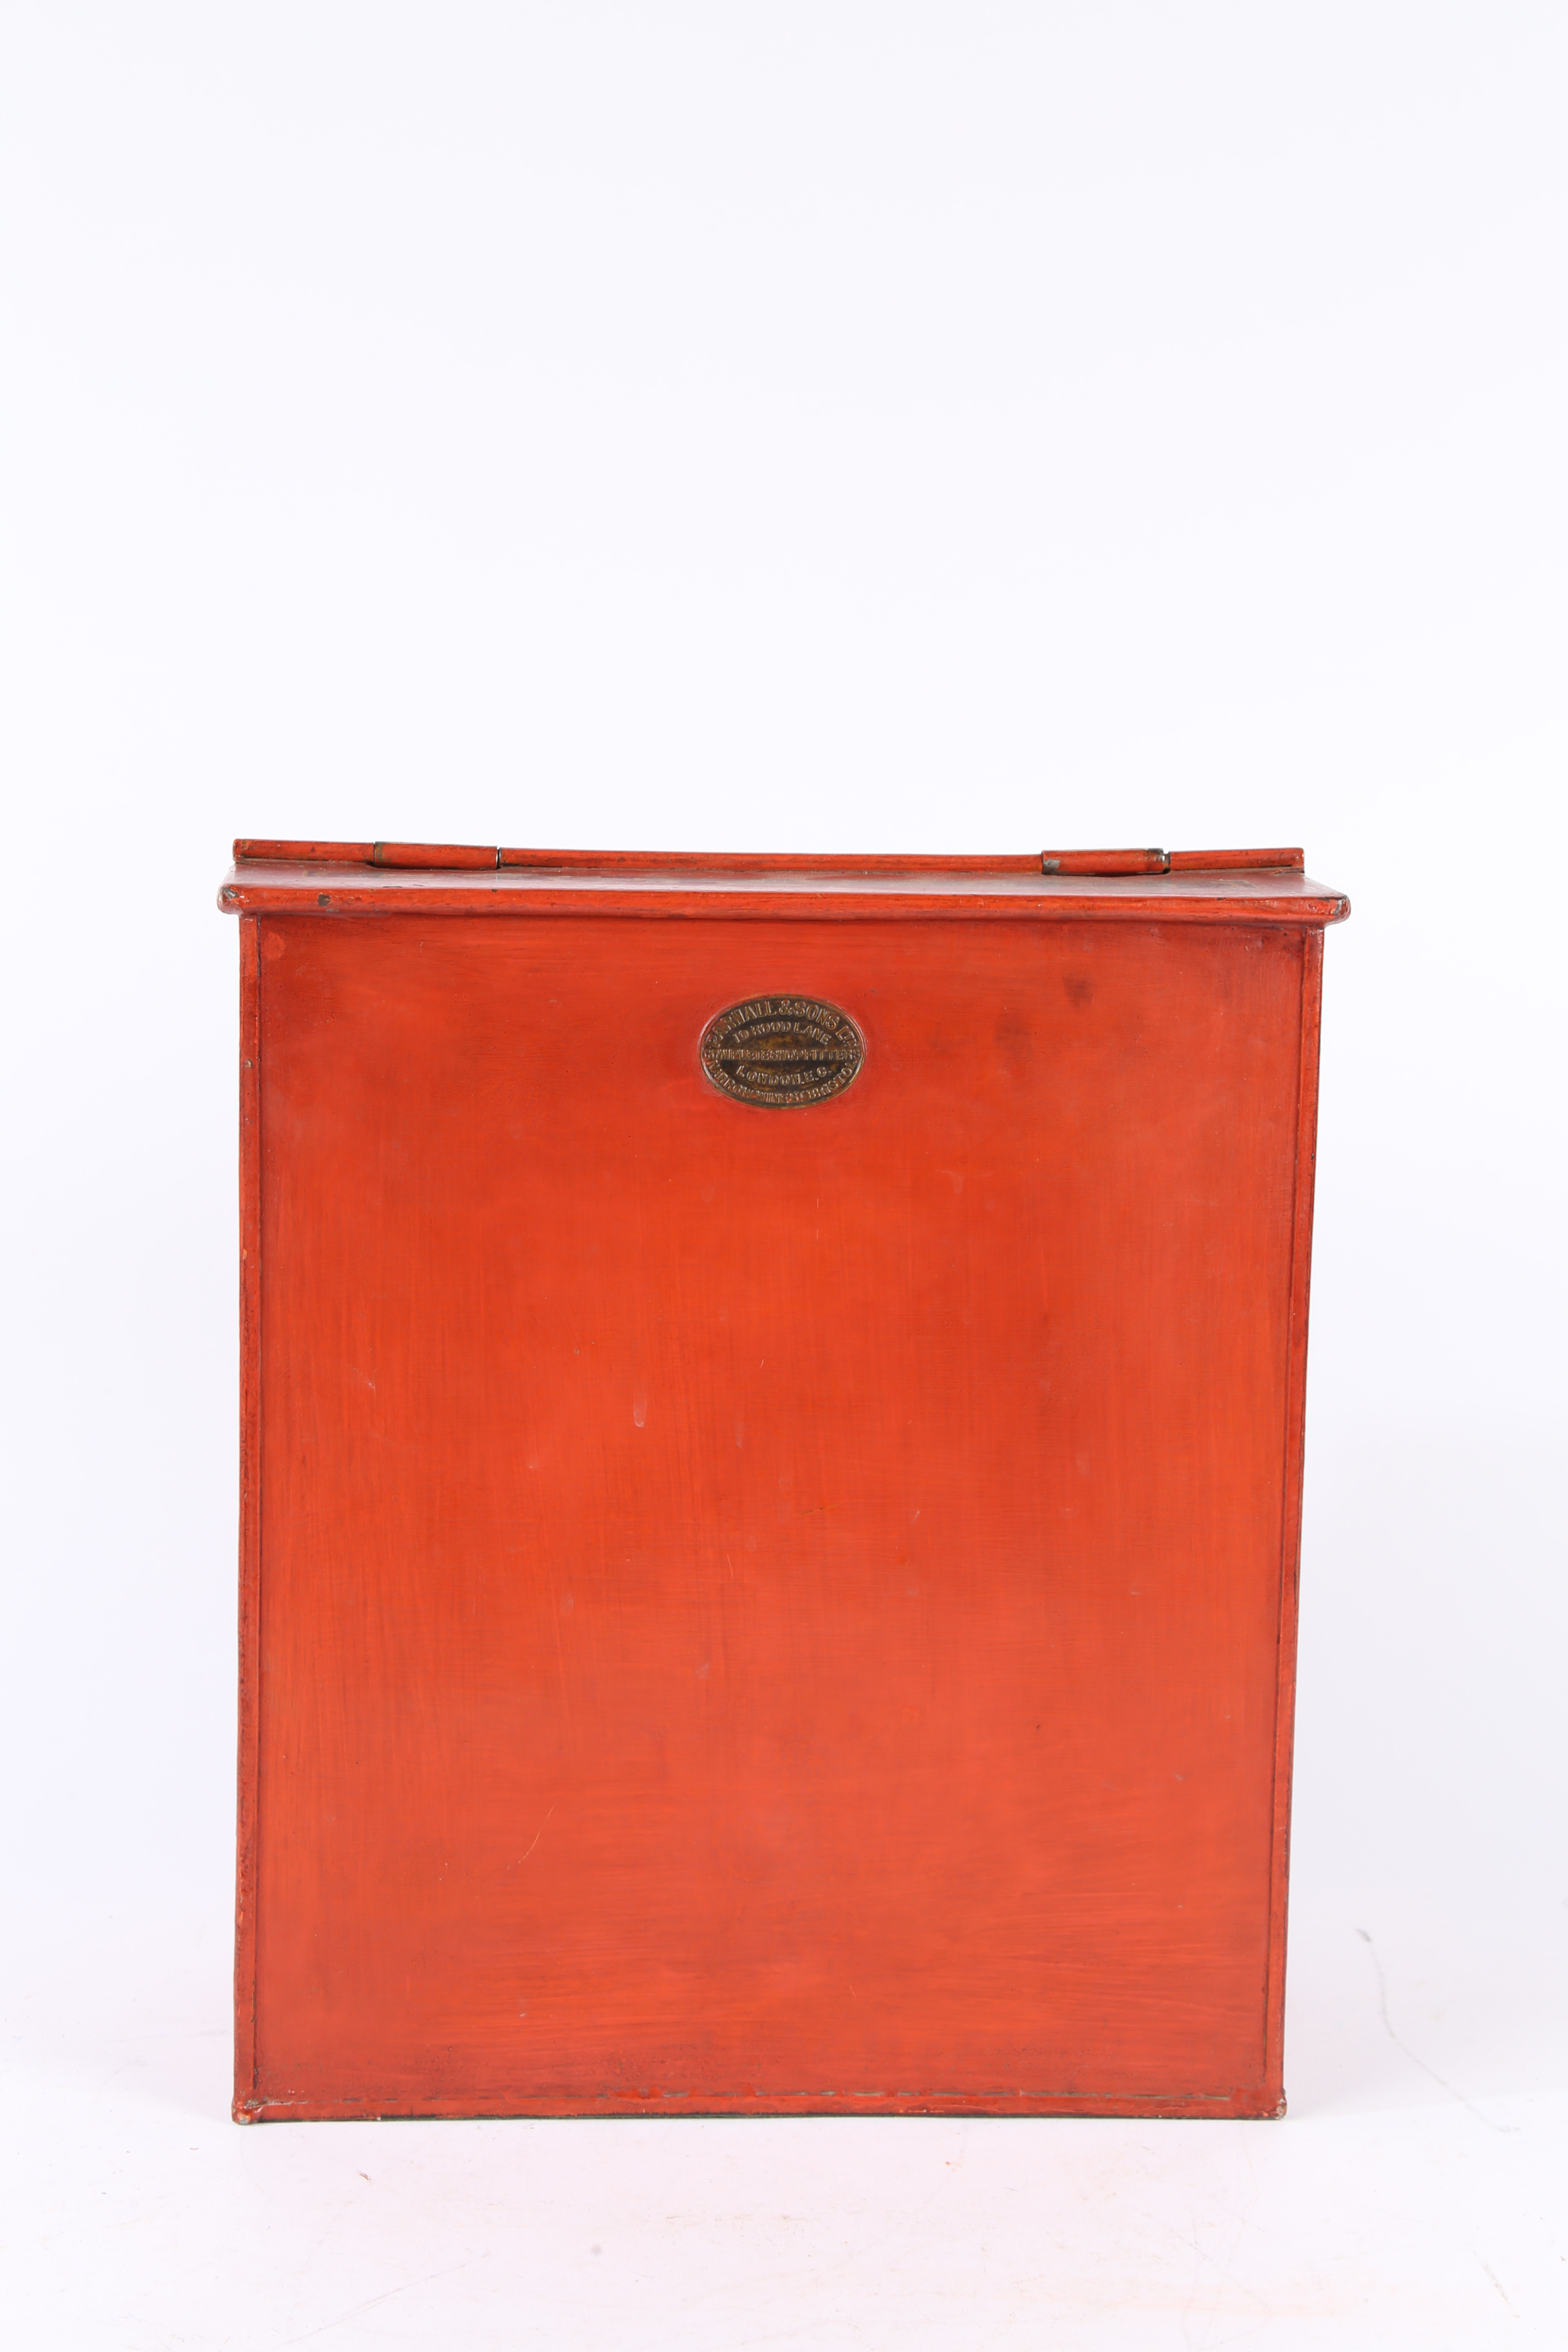 A LARGE 19TH CENTURY SHOP KEEPERS RED TOLEWARE TEA TIN. - Image 5 of 8